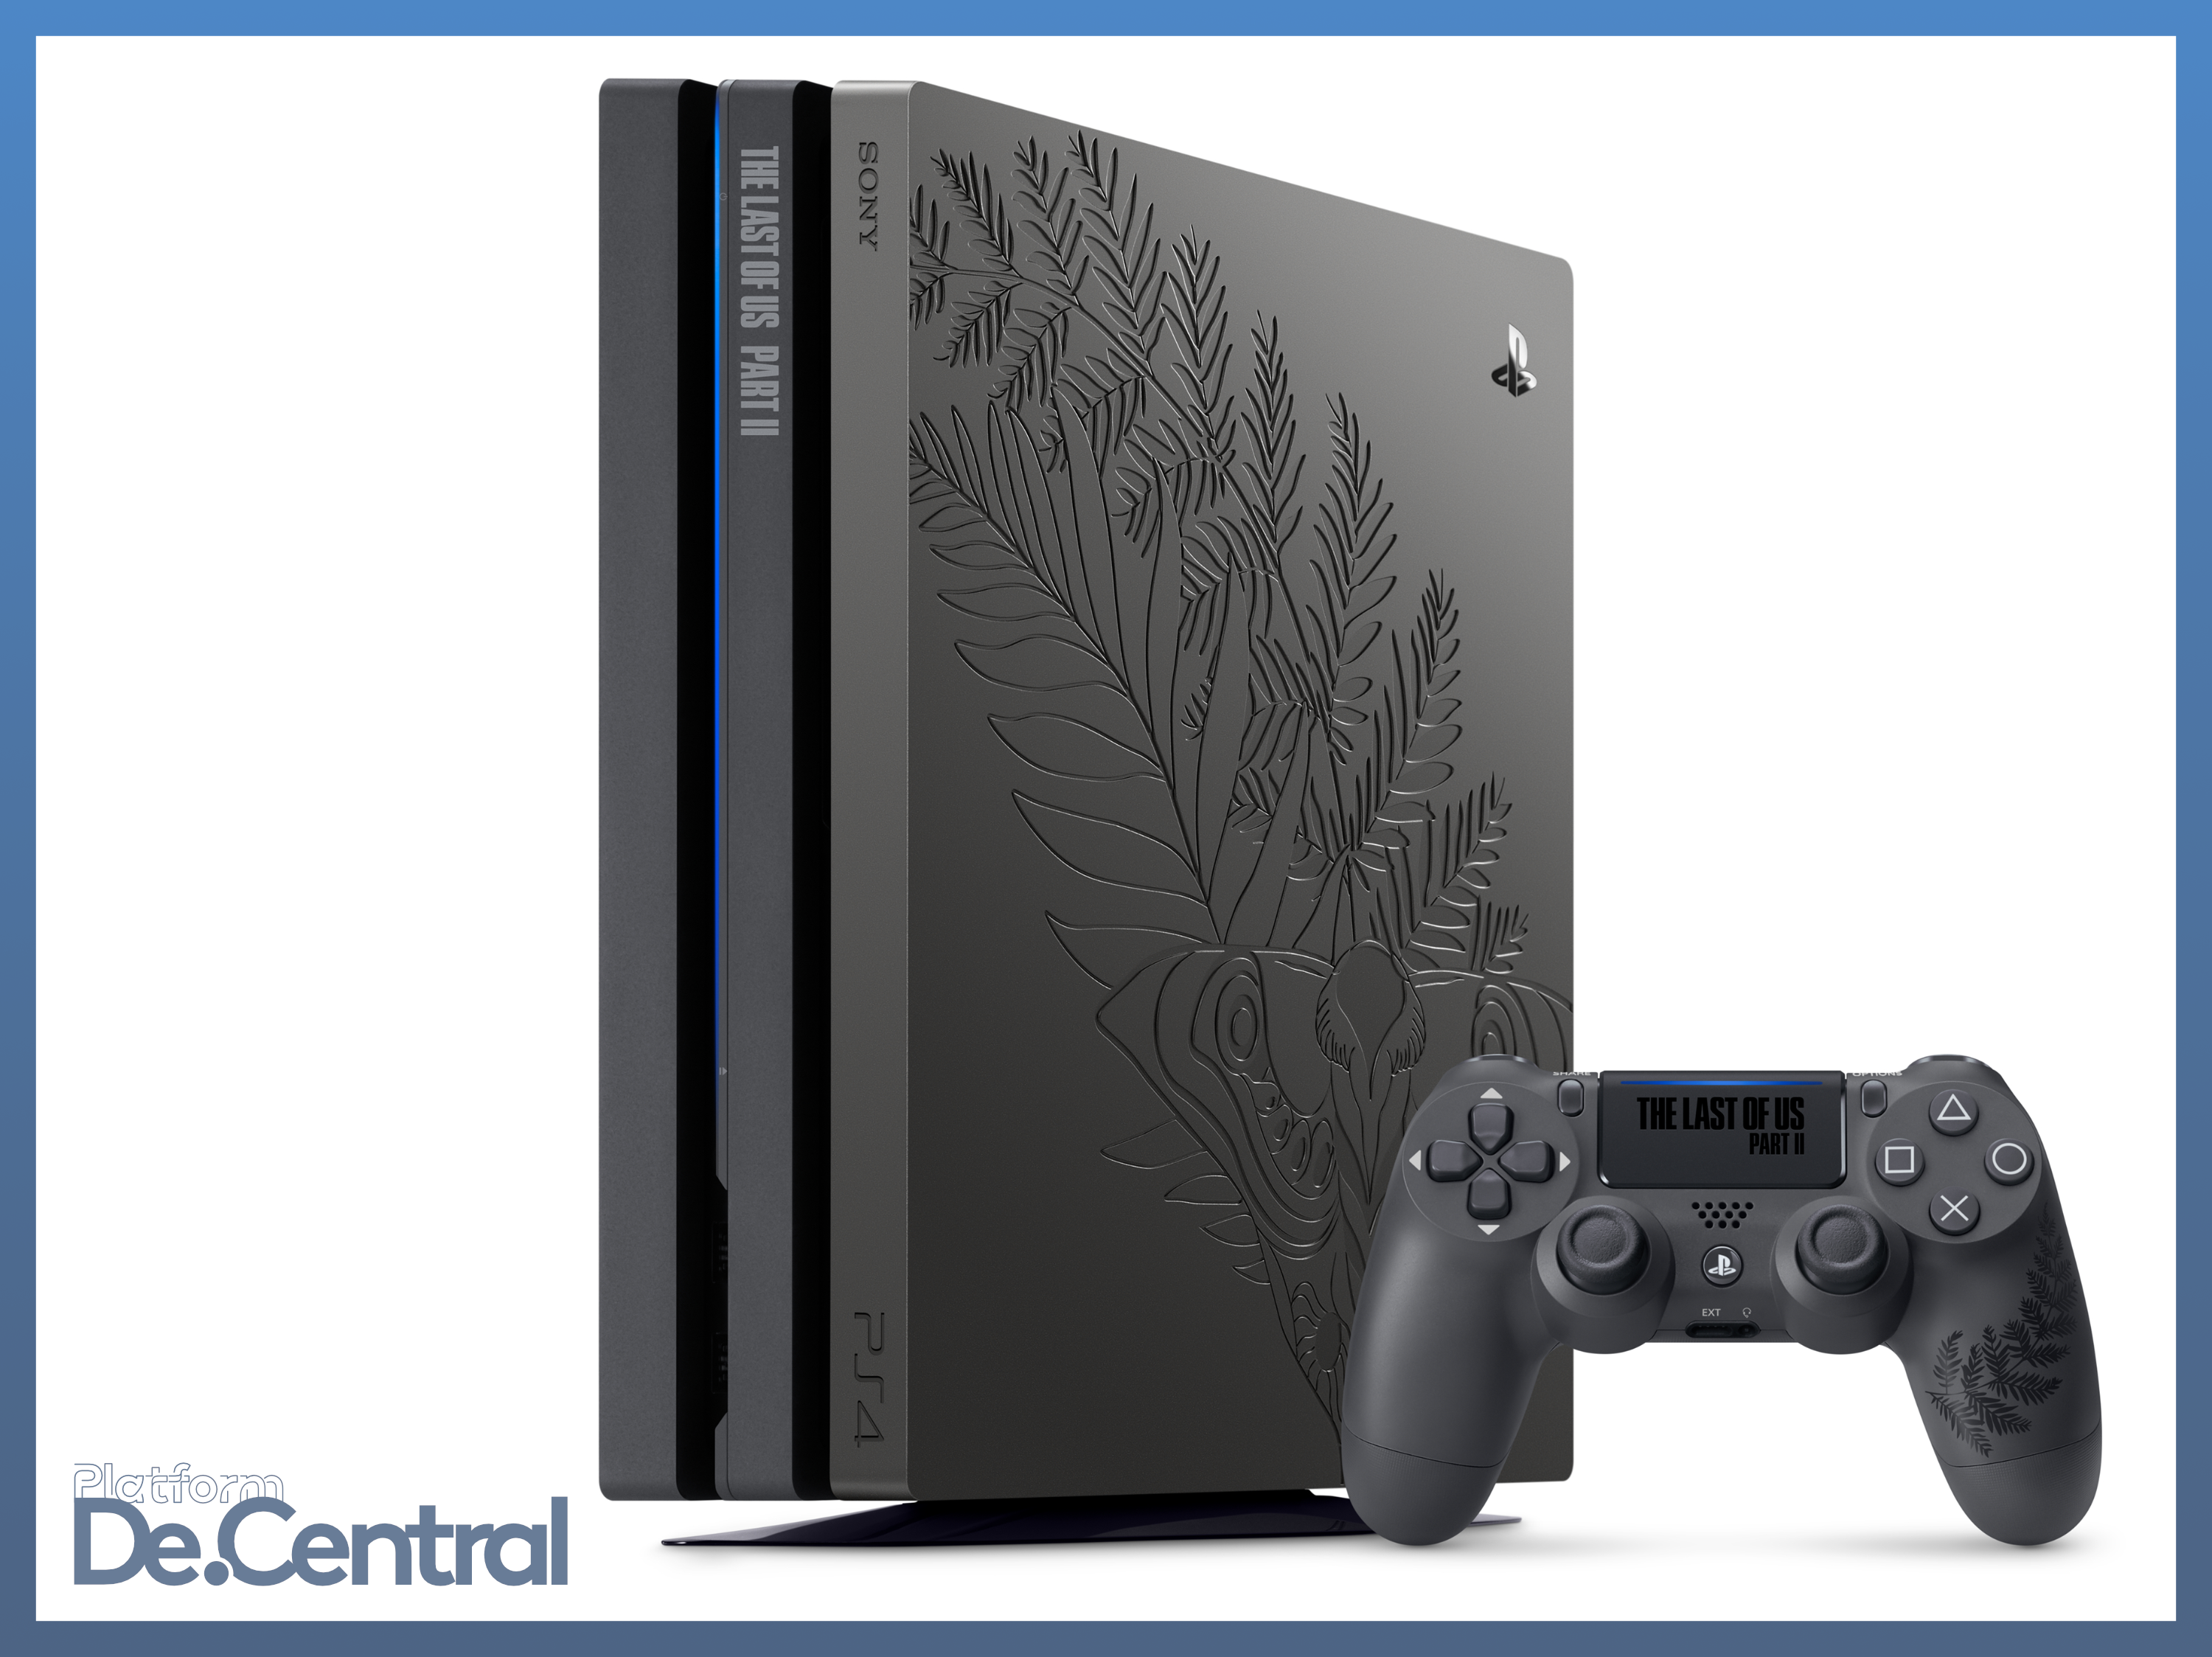 Limited Edition ‘The Last of Us Part II’ PS4 Pro and more